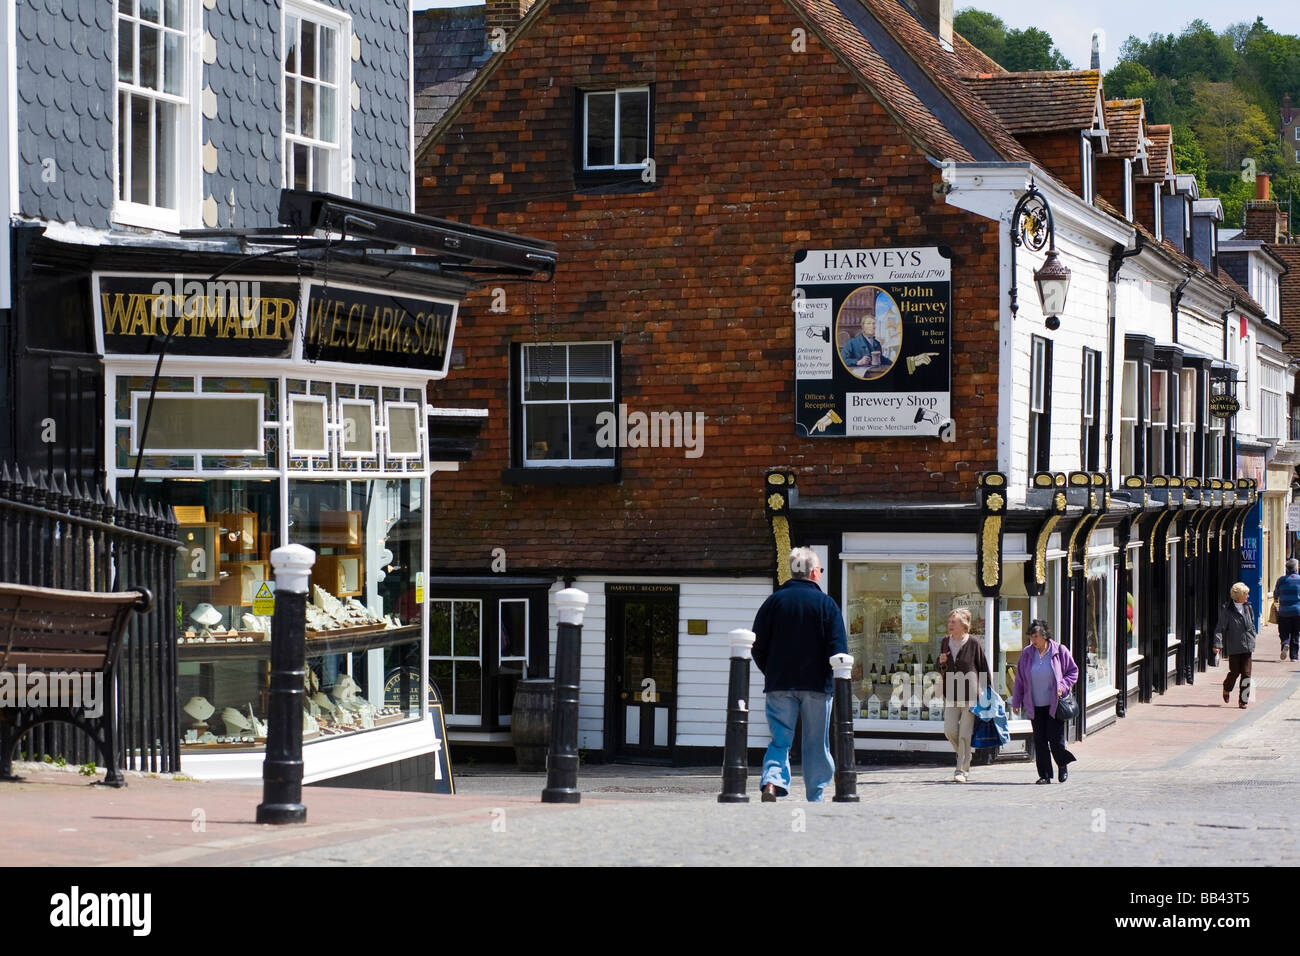 Cliffe High Street, Lewes, East Sussex, UK Stock Photo